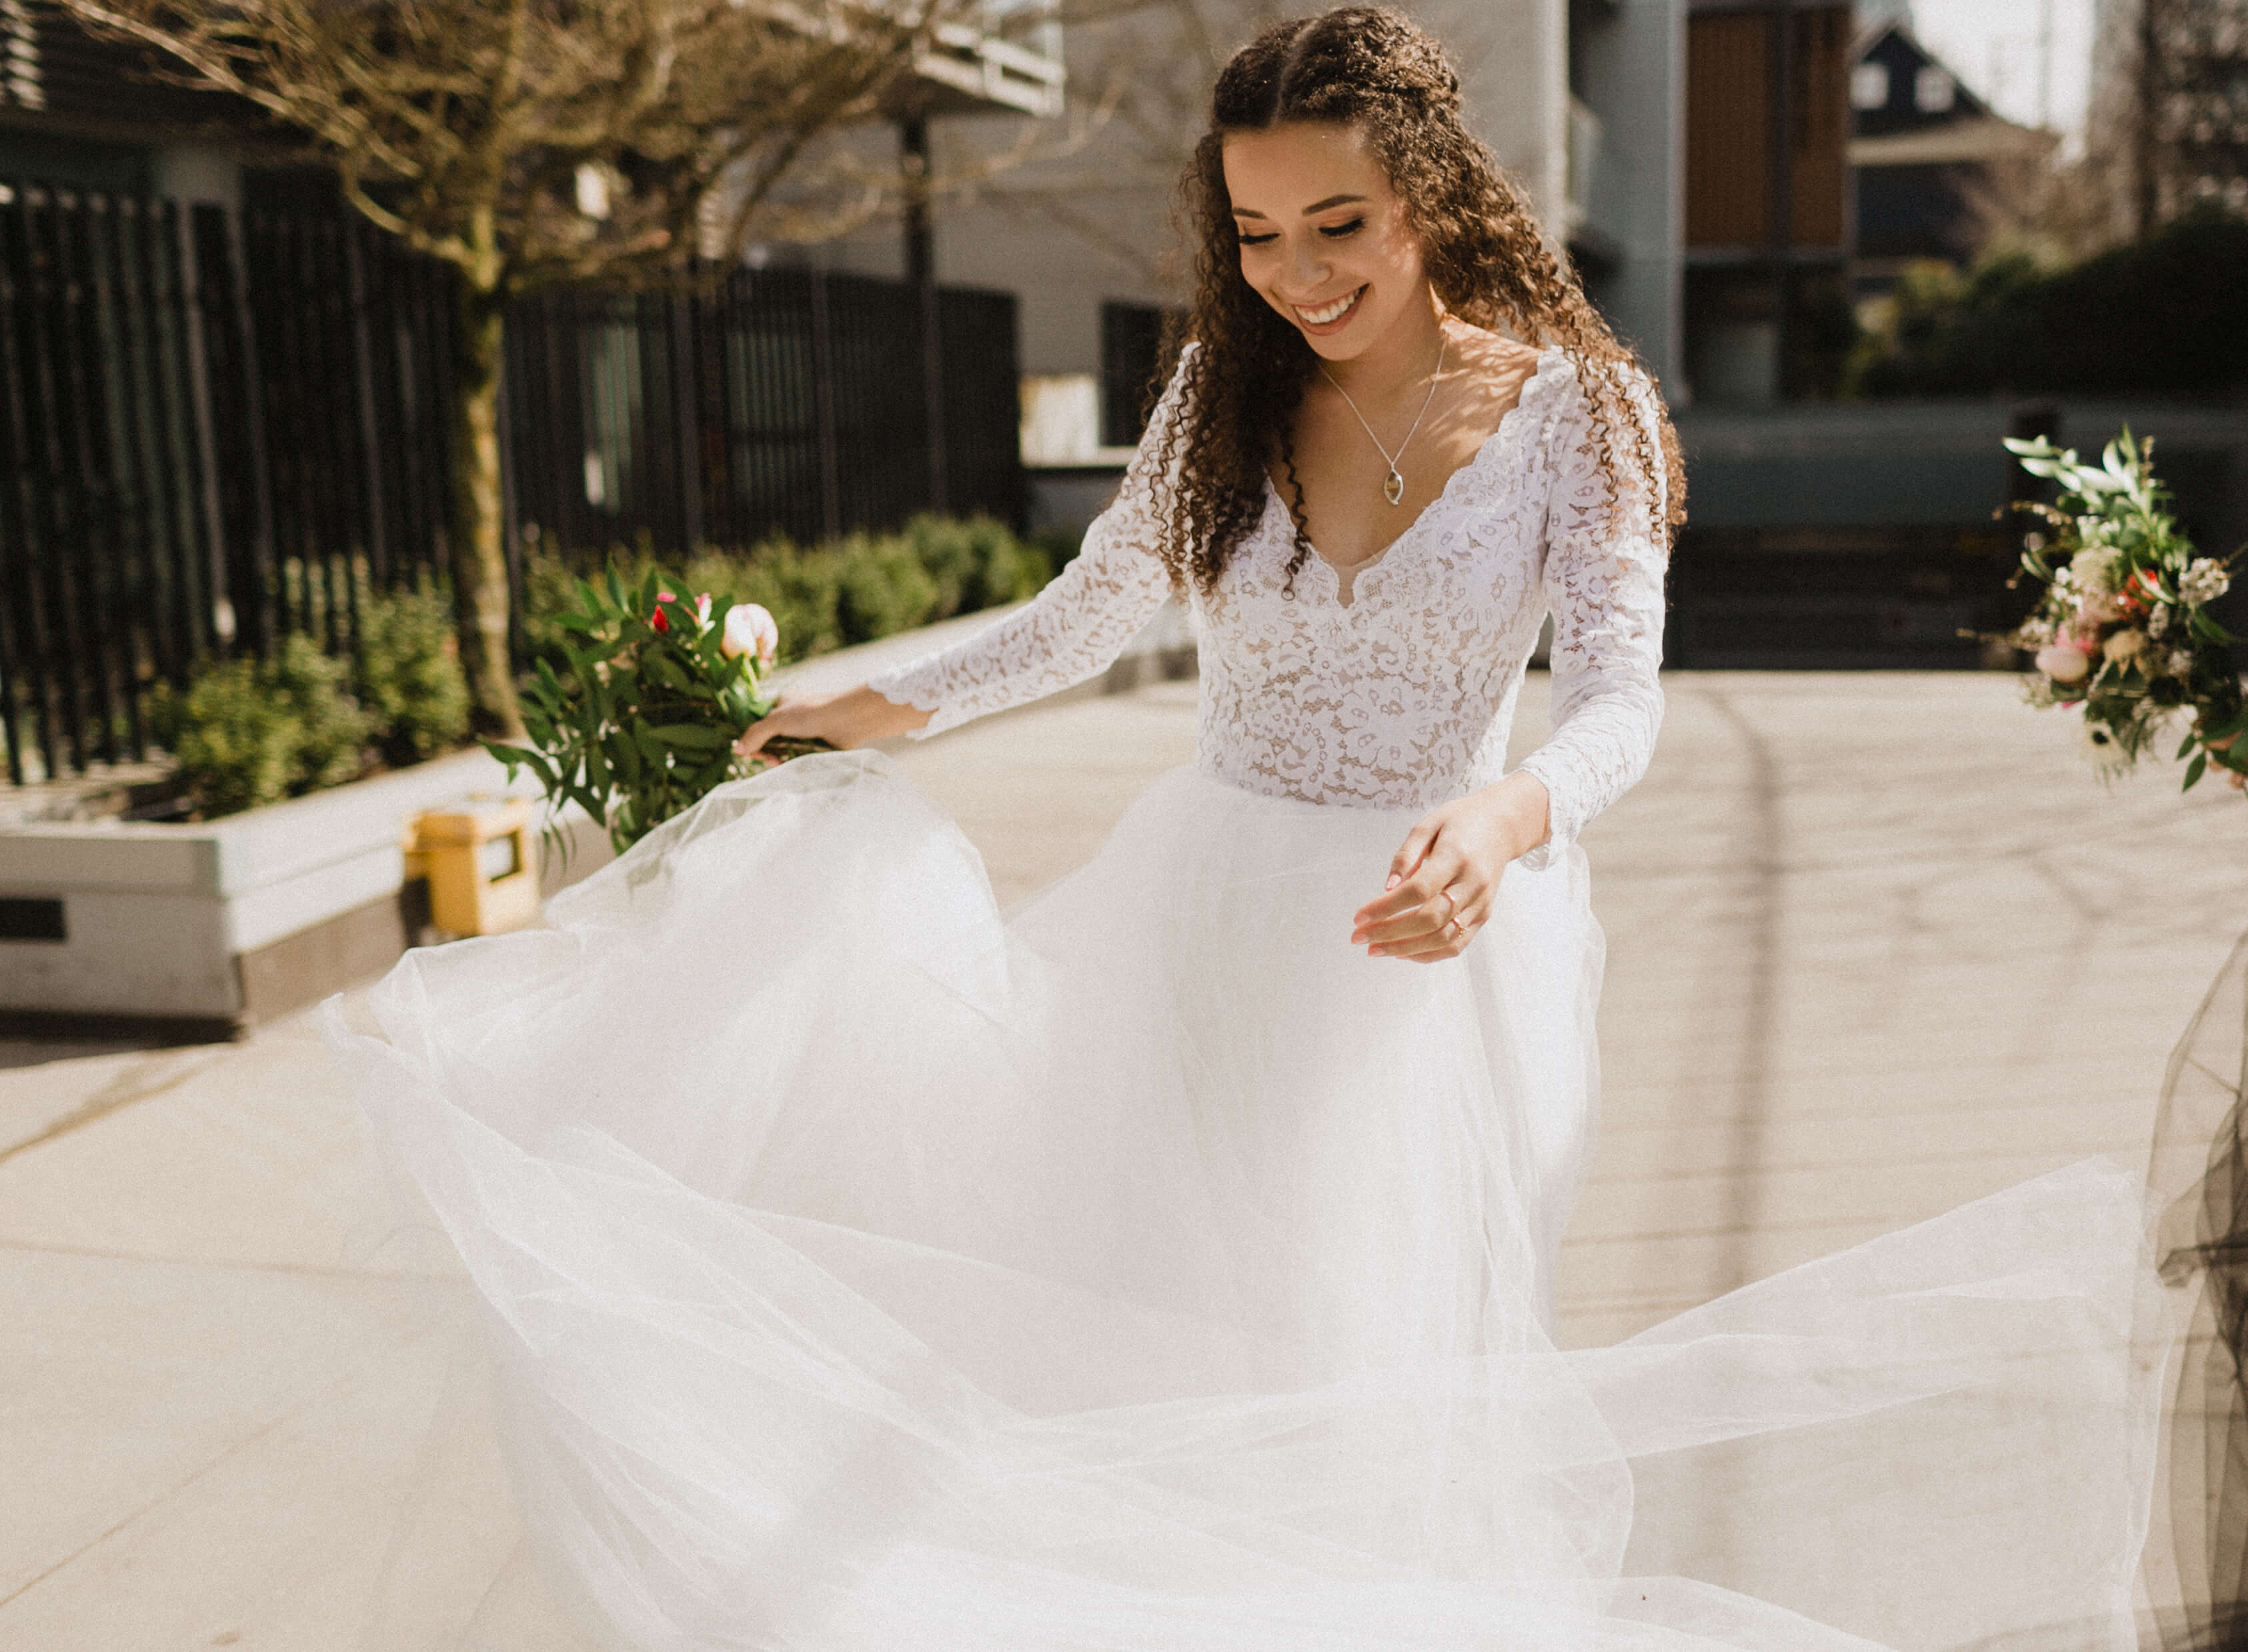 A bride twirls in her sustainable wedding dress, which features long lace sleeves and is made by Pure Magnolia.